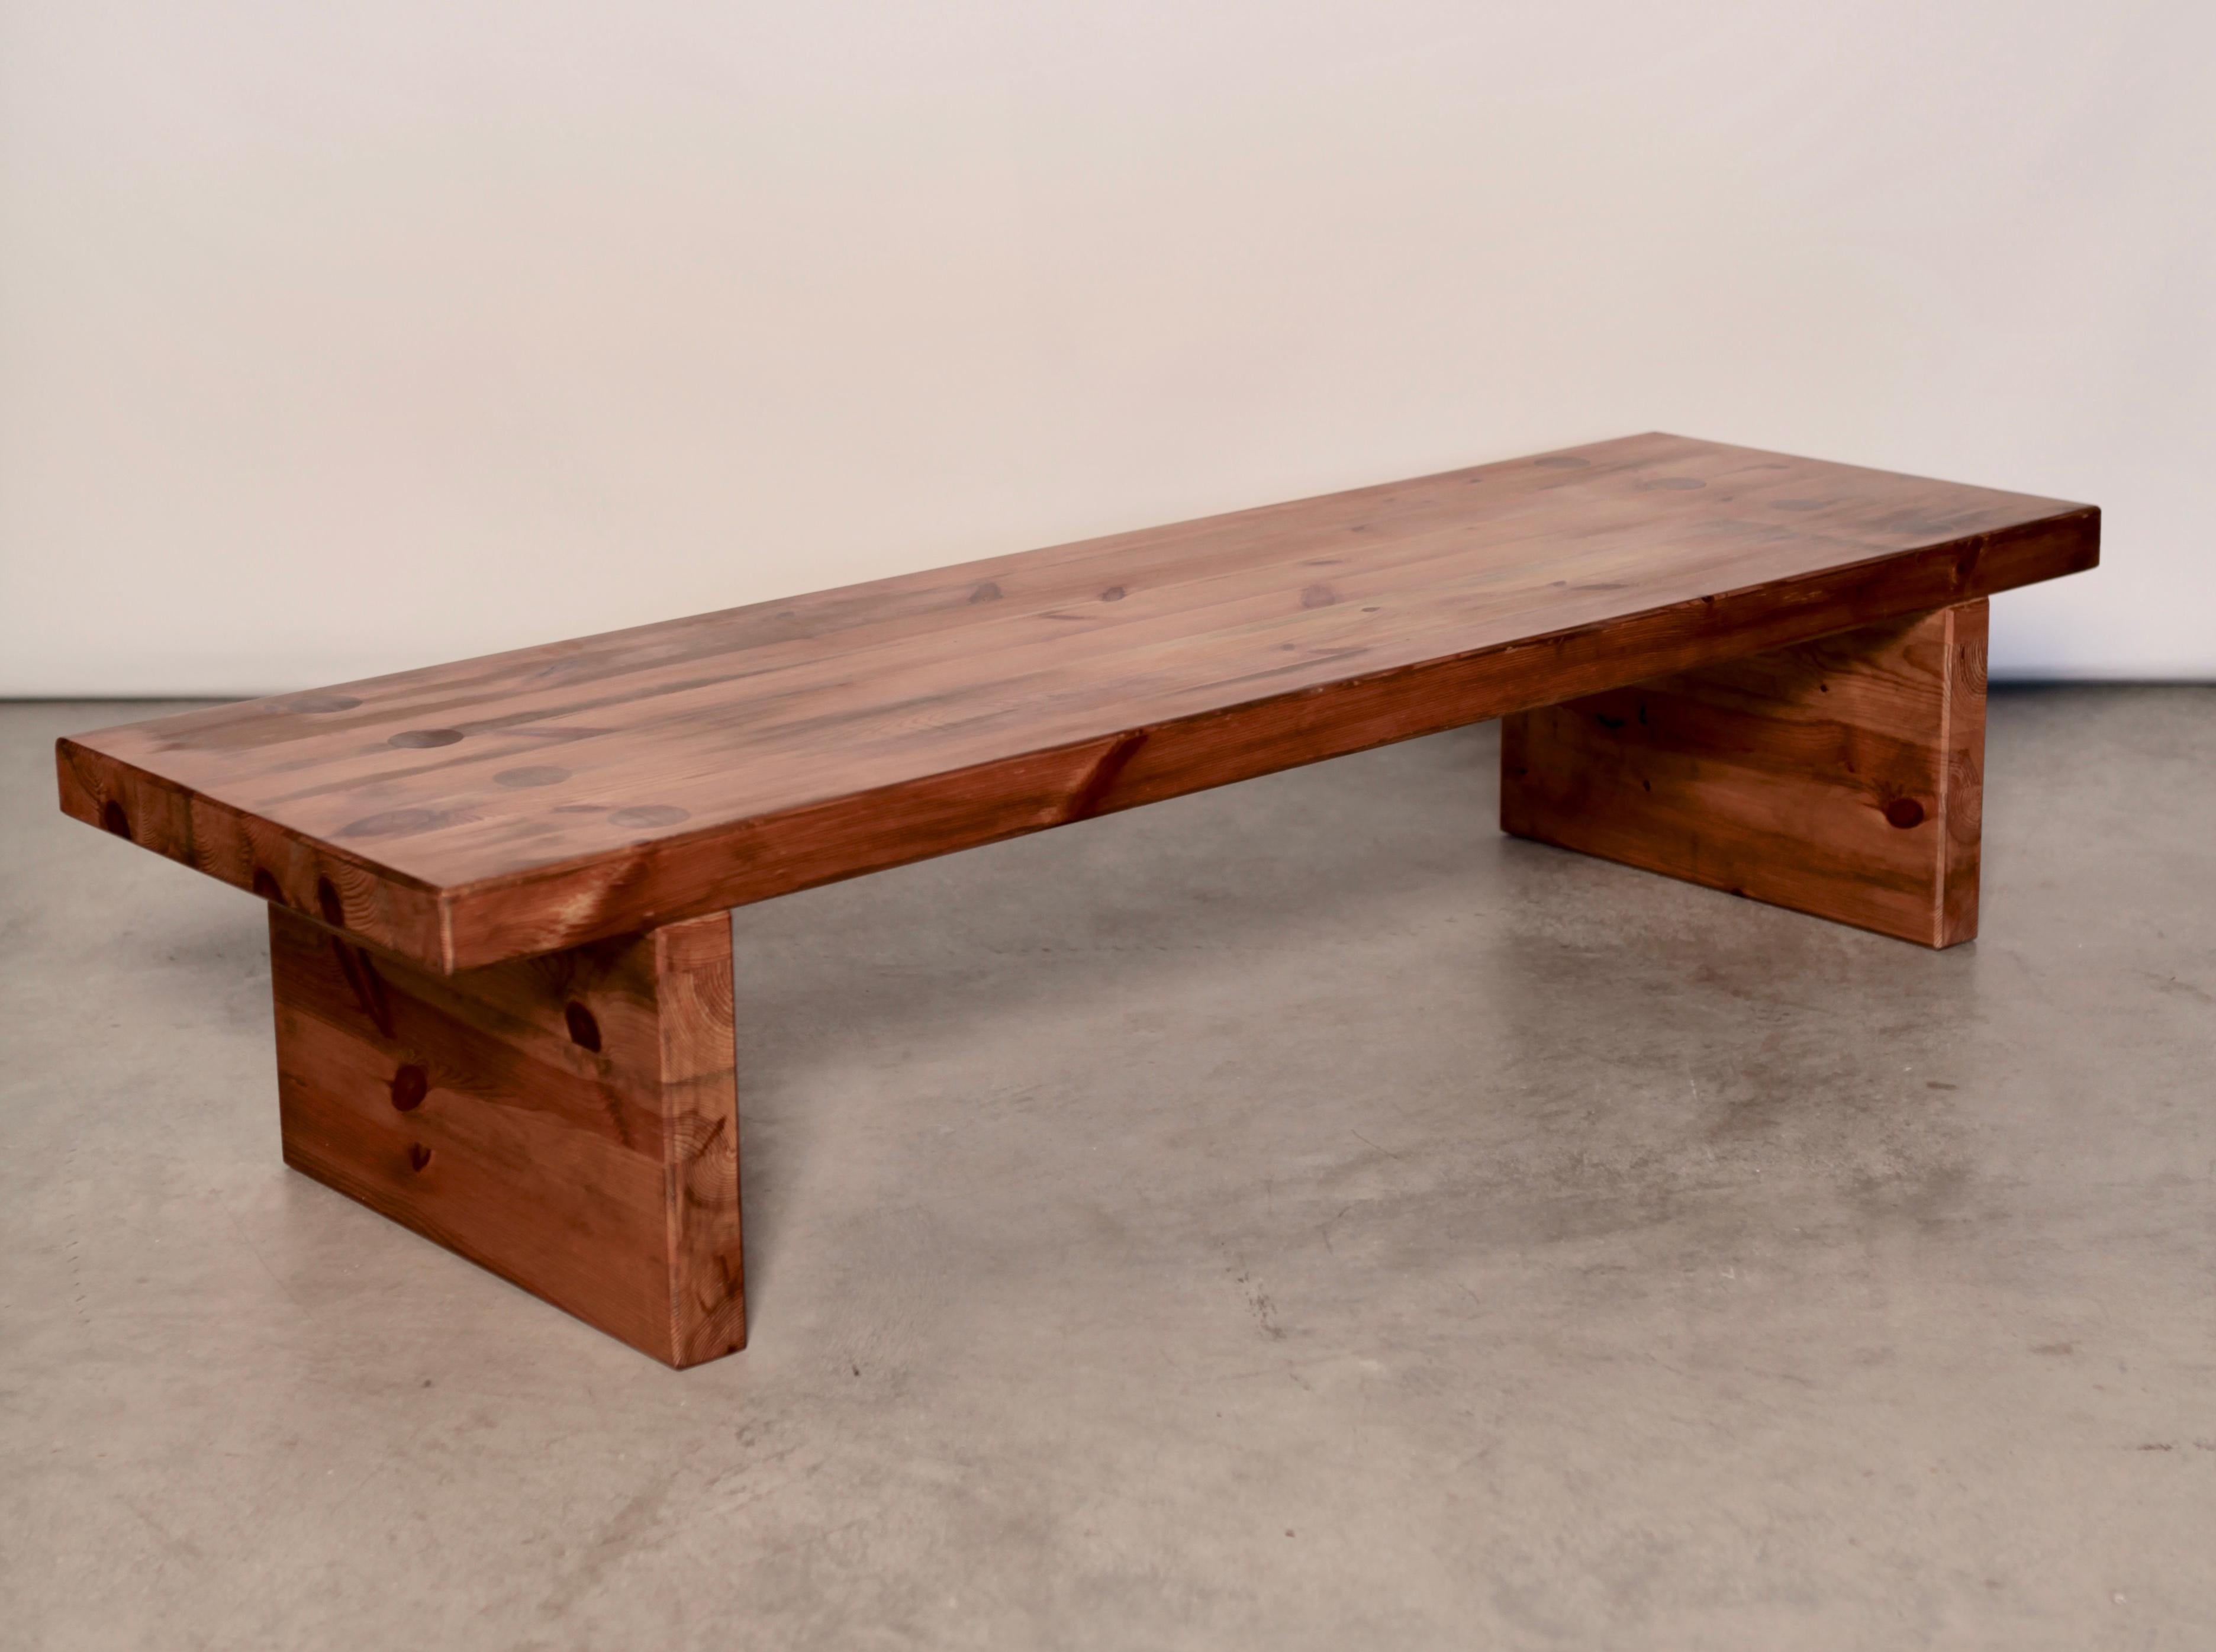 Roland Wilhelmsson, large and rare coffee-table or bench, in stained pine, in excellent vintage condition.
Manufactured by Karl Andersson & Söner AB in Sweden, 1960s.